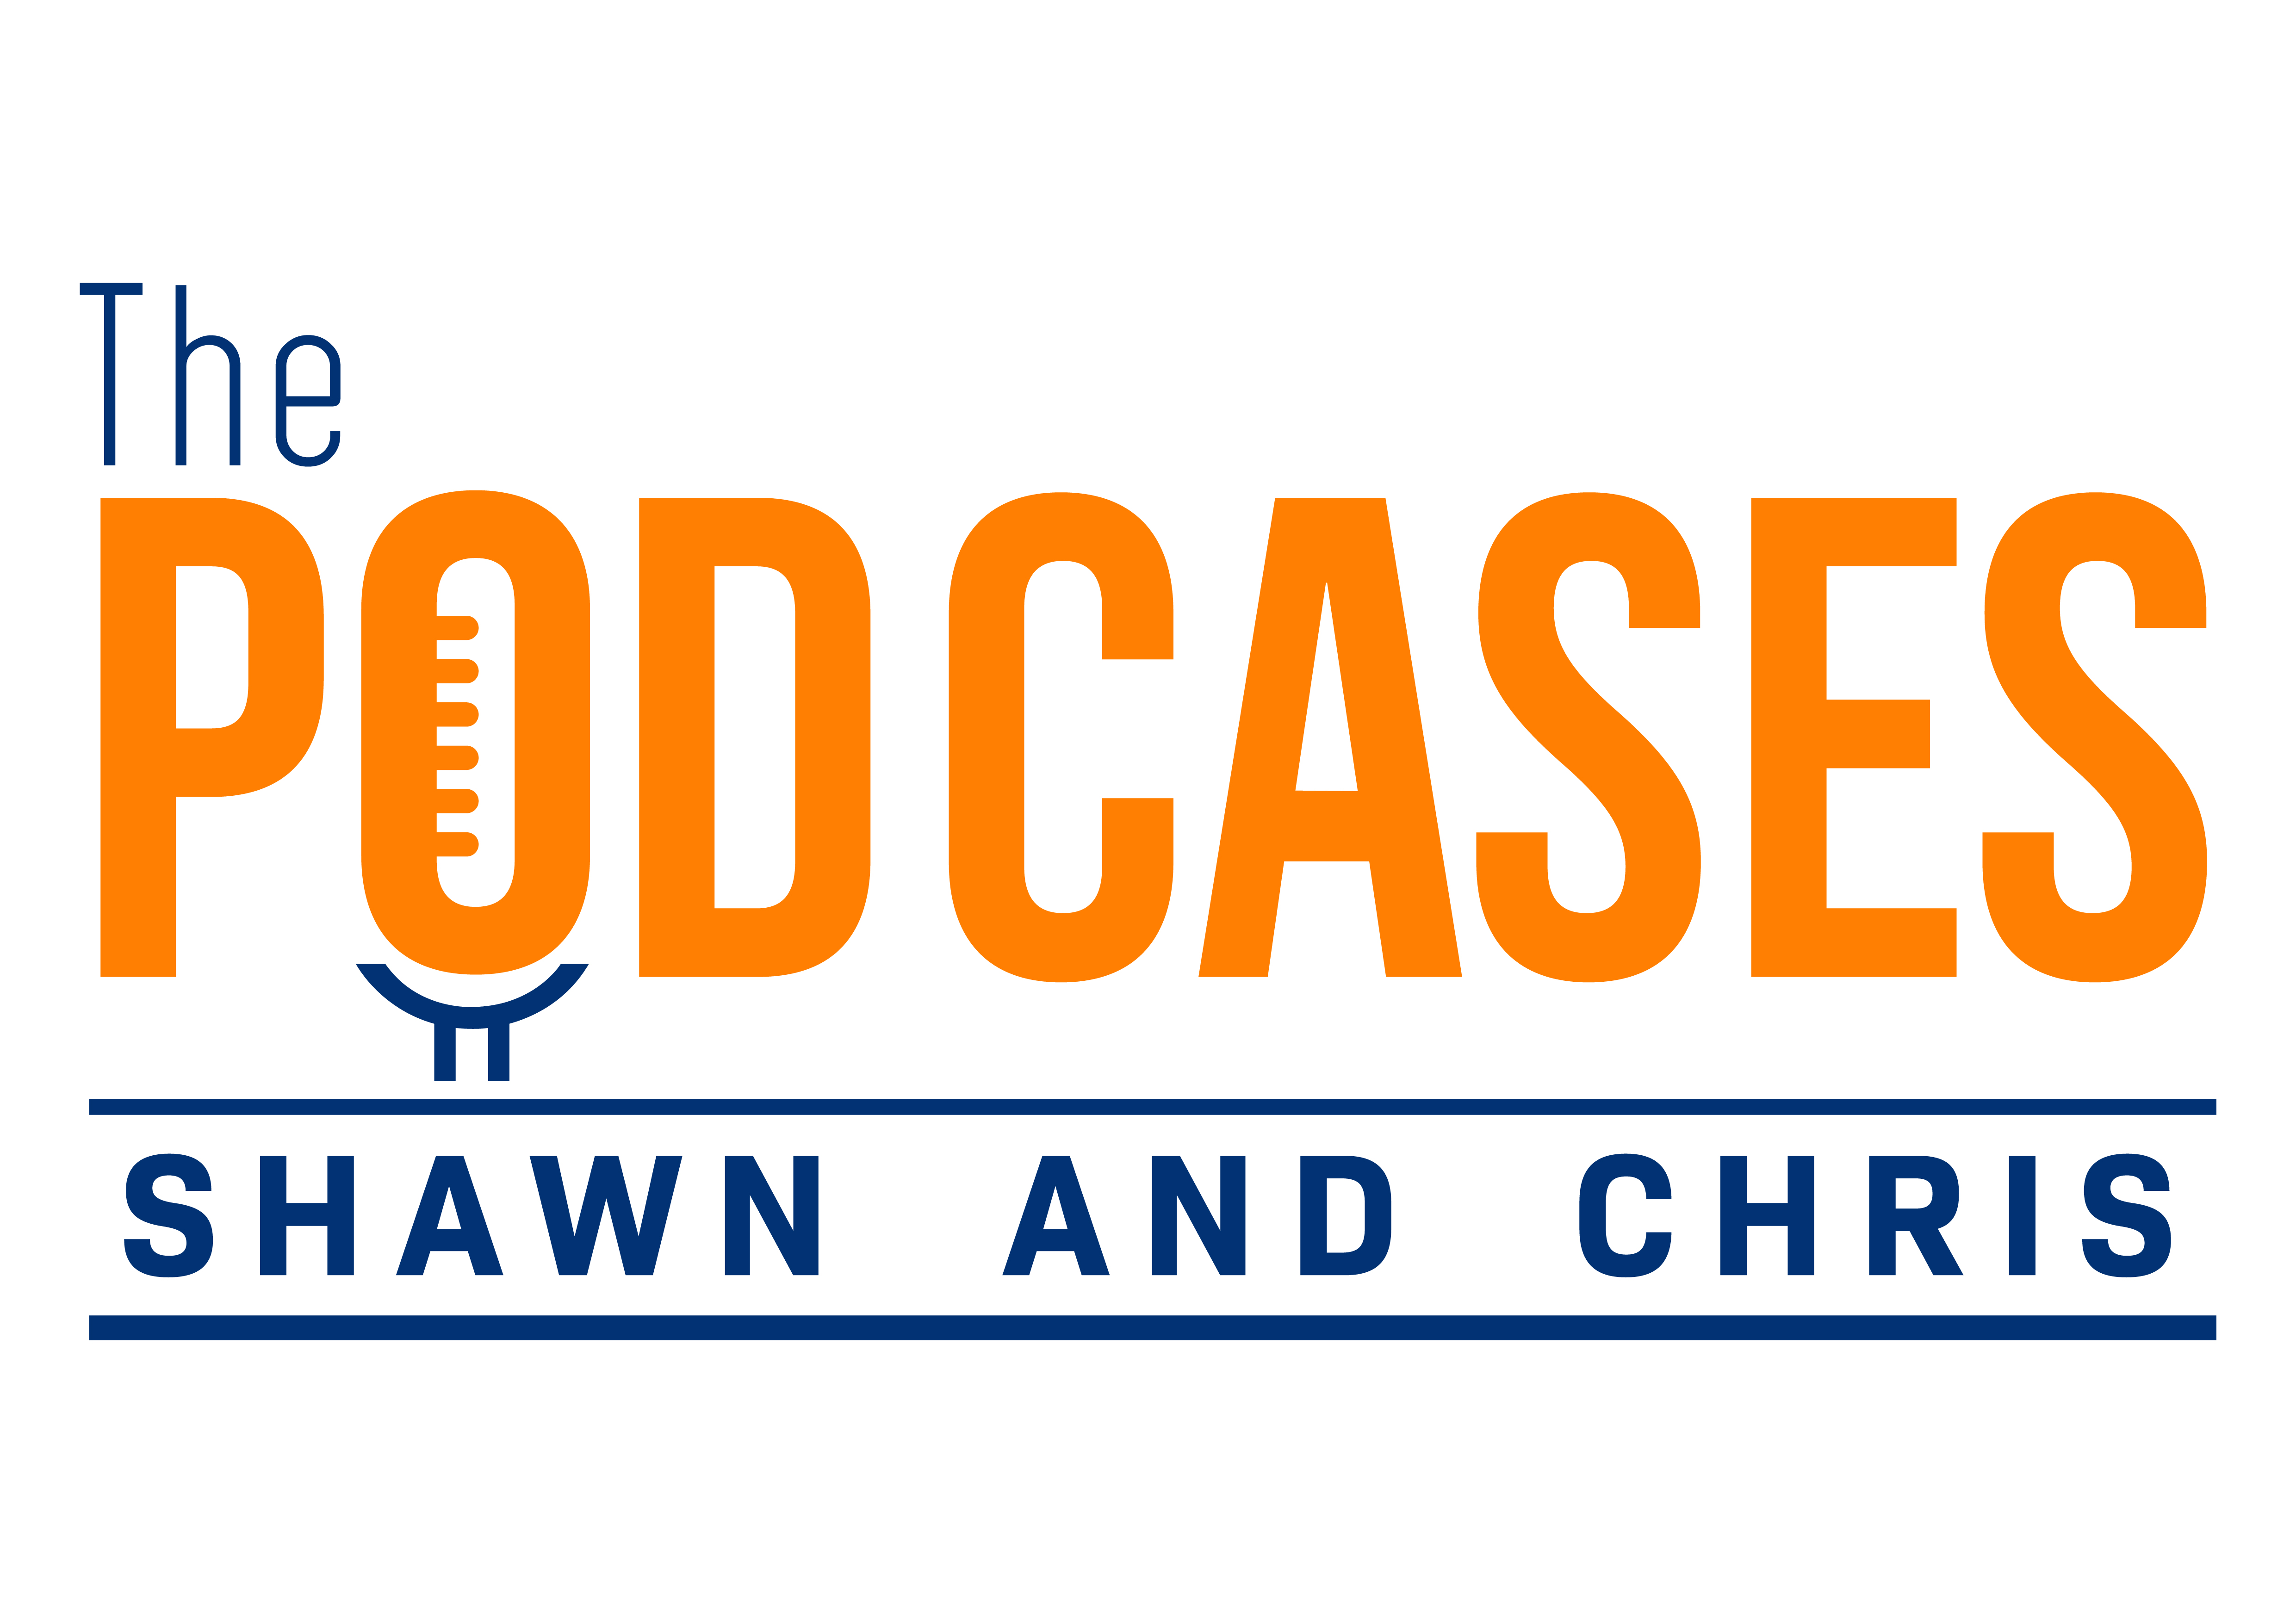 Podcases: Information, Humor and Entertainment with Shawn and Chris